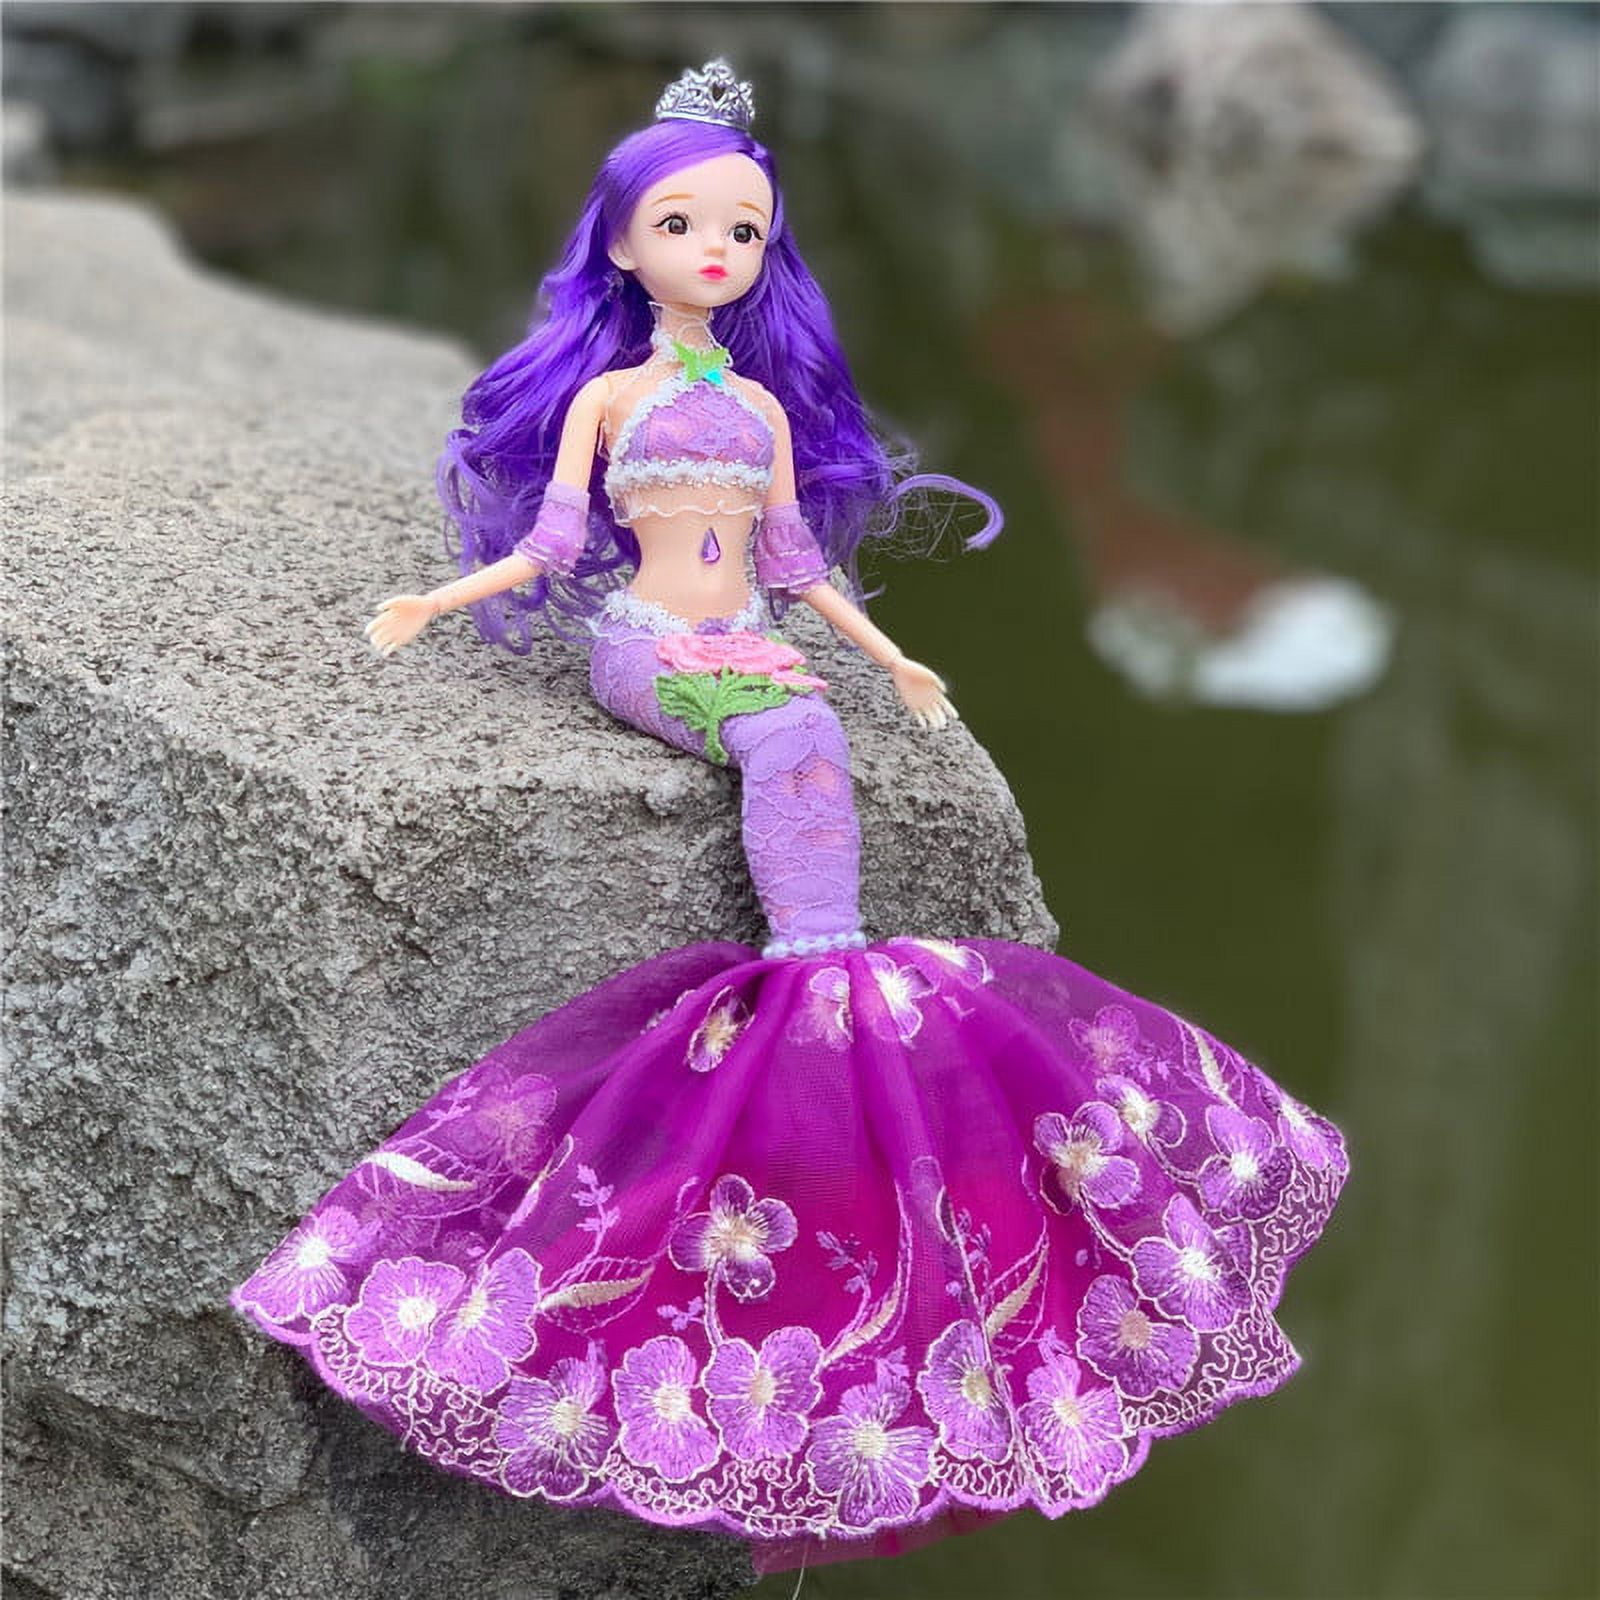 Kawaii Fashion Body For Dolls Plastic Mermaid Toys For Girls Kids Miniature  Items Accessories For Barbie DIY Children Game Gifts